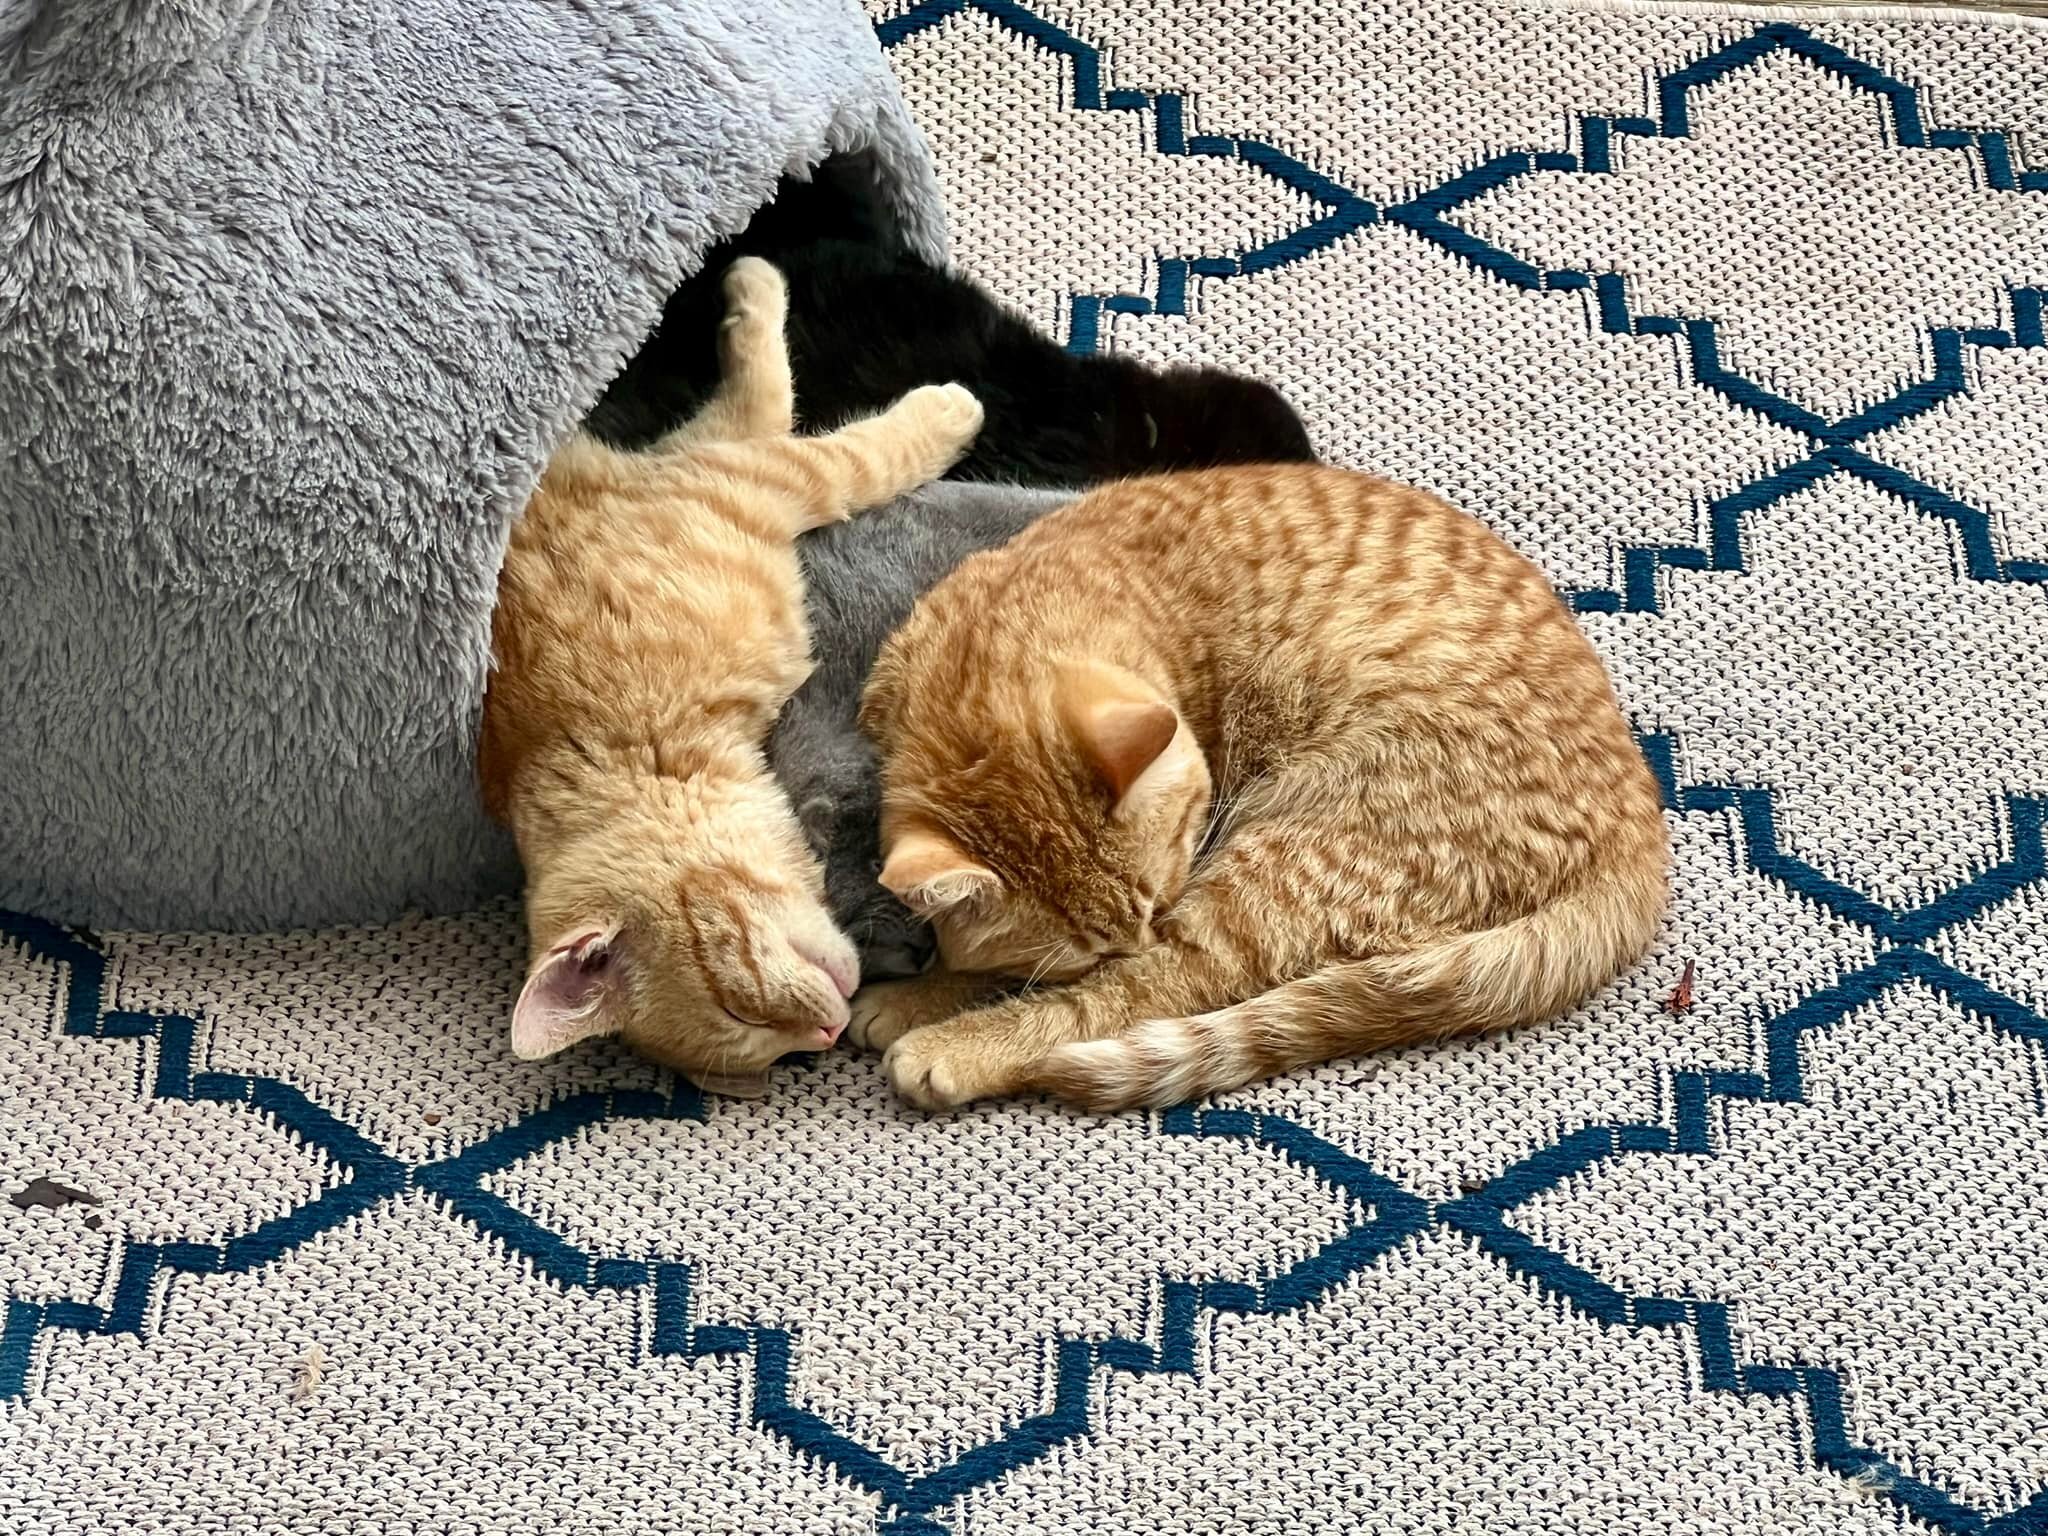 KIDDENS | what is sweeter than a fuzzy little kitten? We have had the joy of socializing four little kittens from our neighborhood. Their mama is a neighborhood stray, and she brought these four kittens over once they were weaned. (side note: yes, we